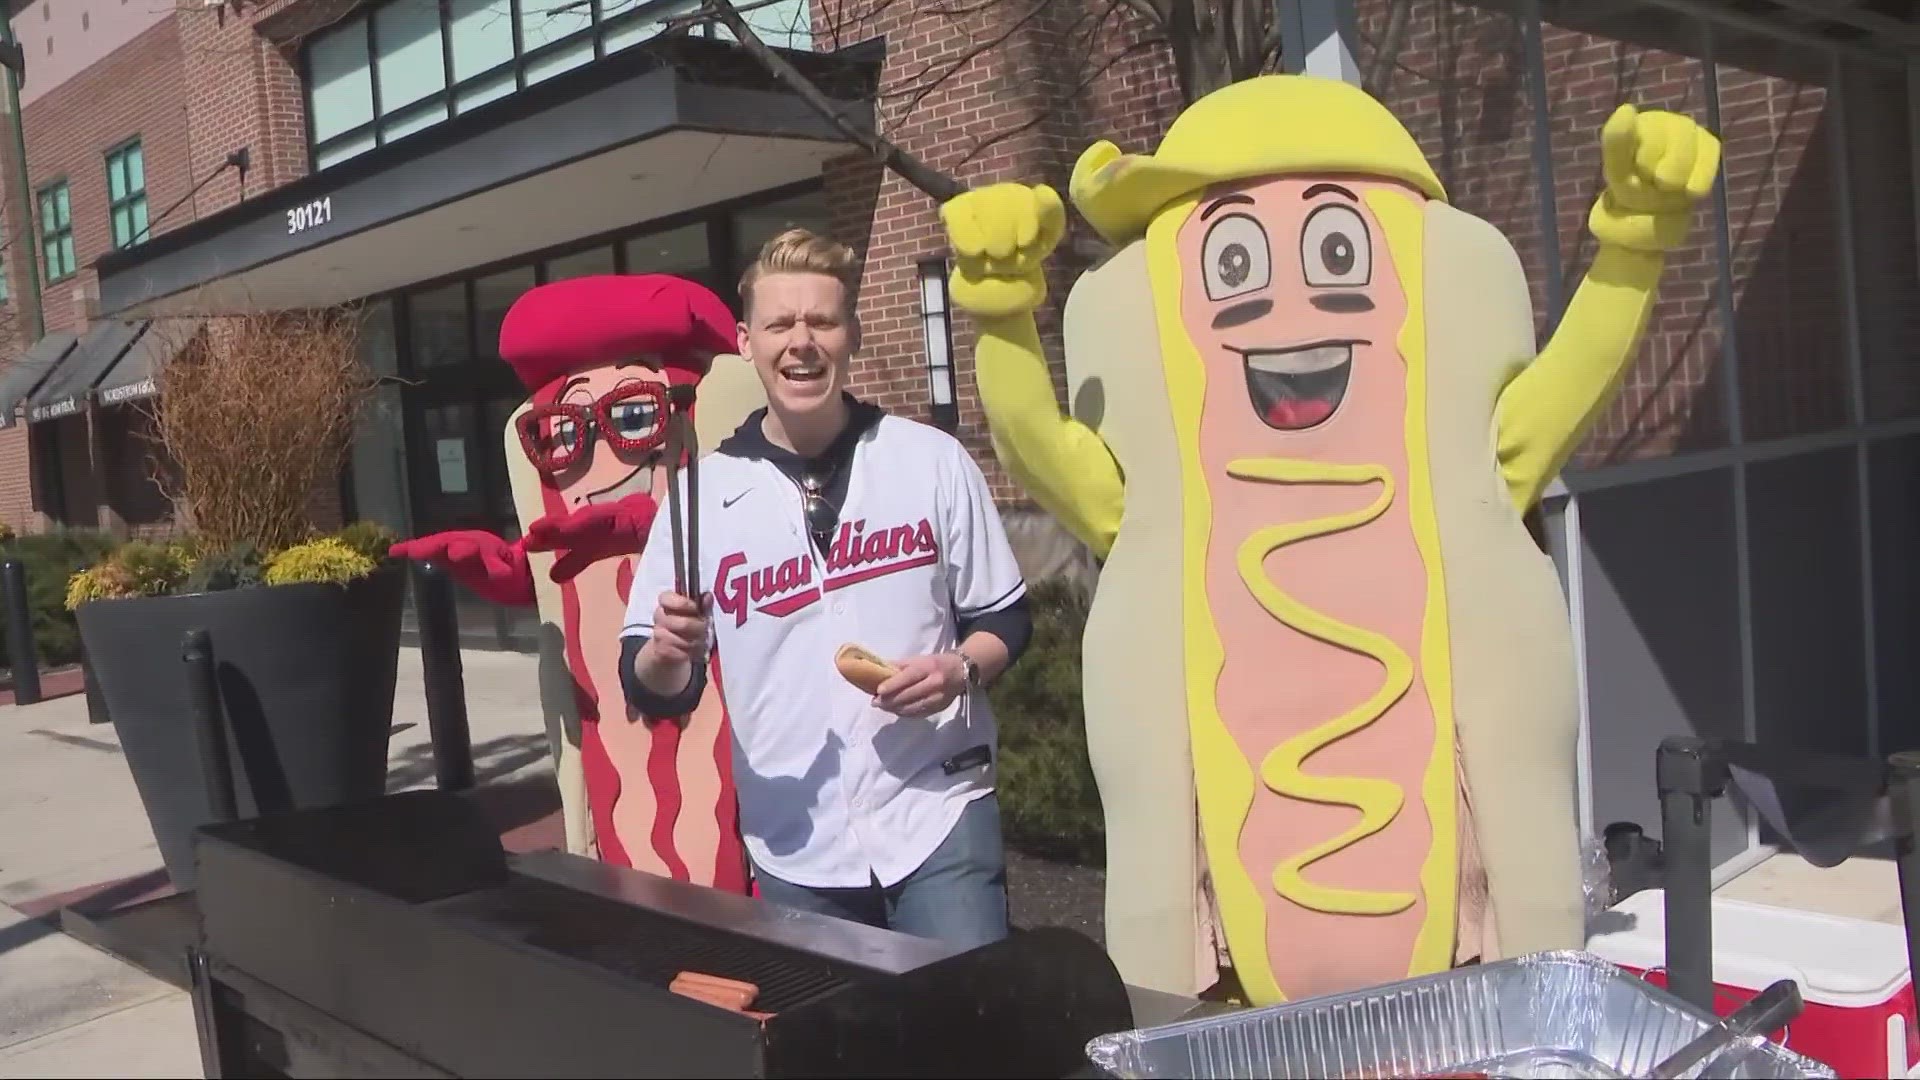 It wouldn't be a baseball game without some tasty Cleveland Guardians hot dogs. Here's how 3News' Austin Love helped them raise money for a good cause.